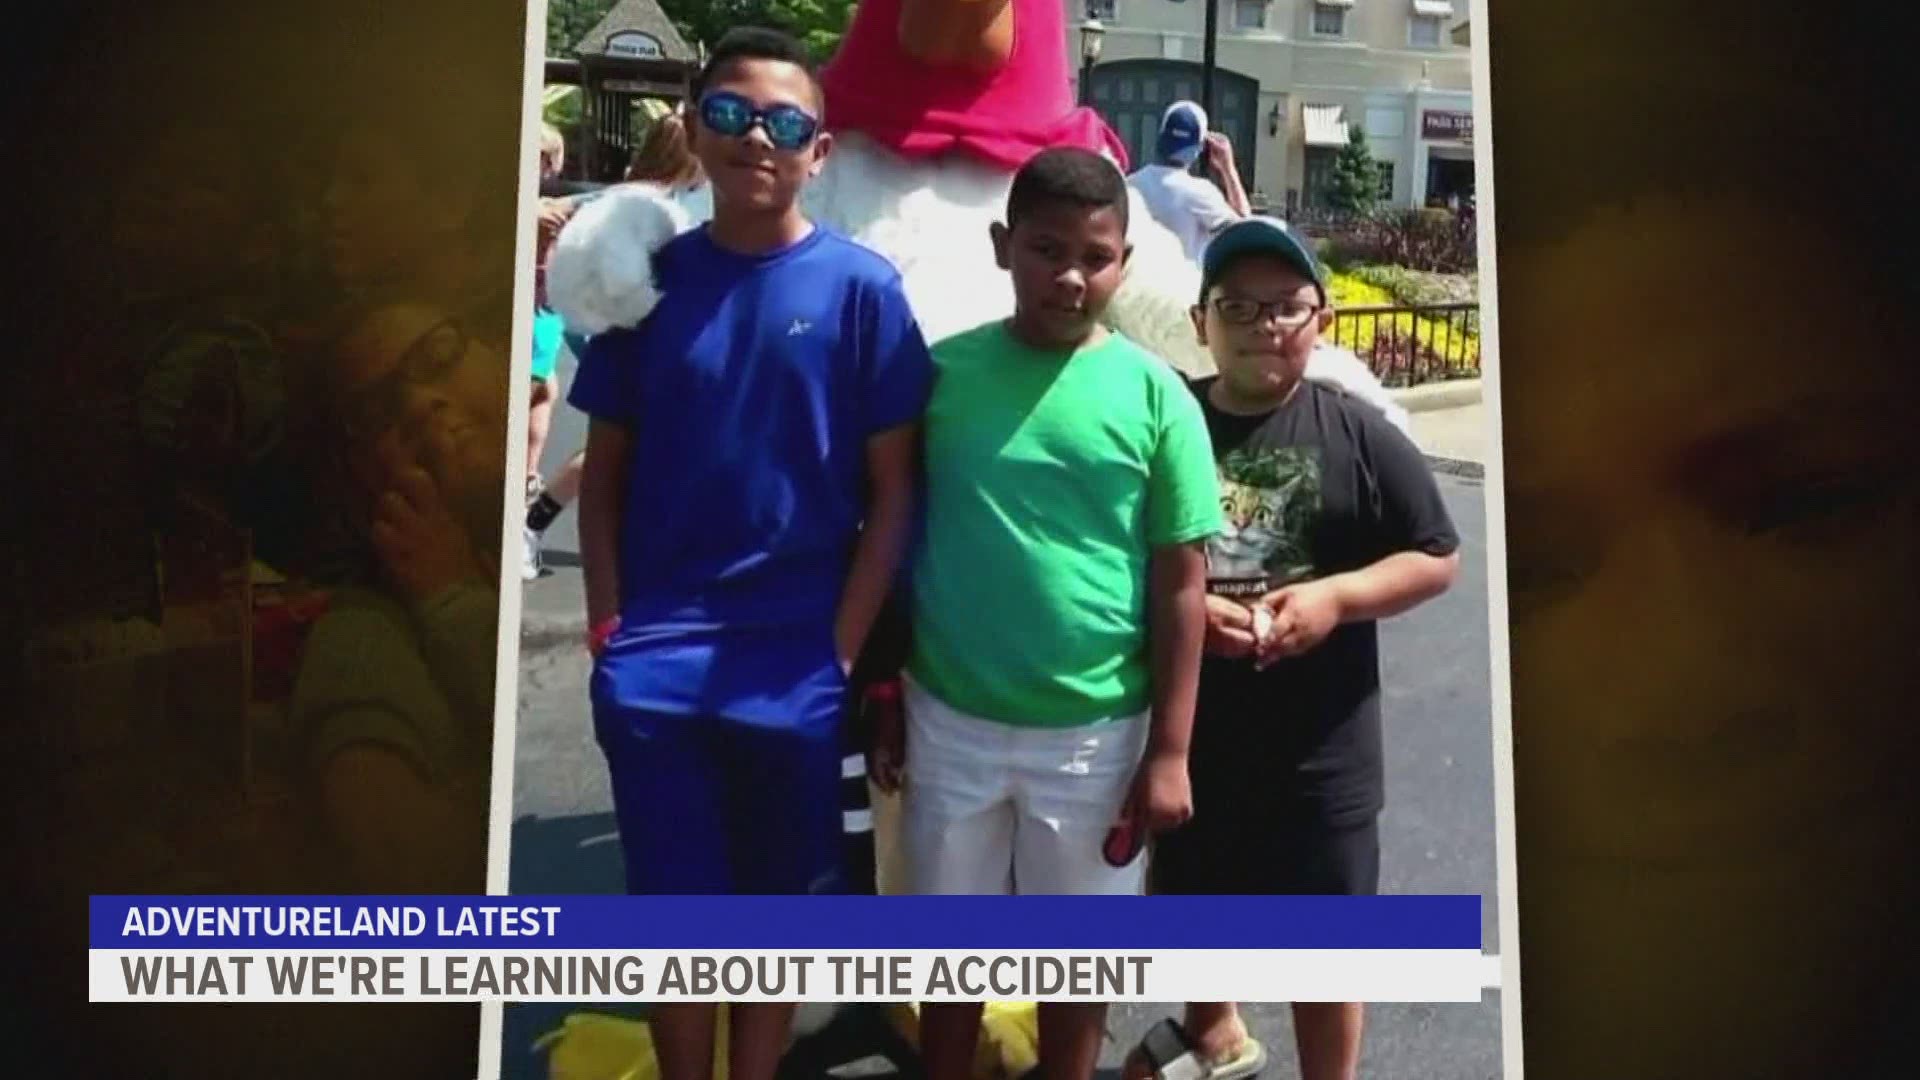 David Jaramillo remains in the hospital after the July 3 incident at Adventureland. His brother, 11-year-old Michael Jaramillo was killed in the accident.